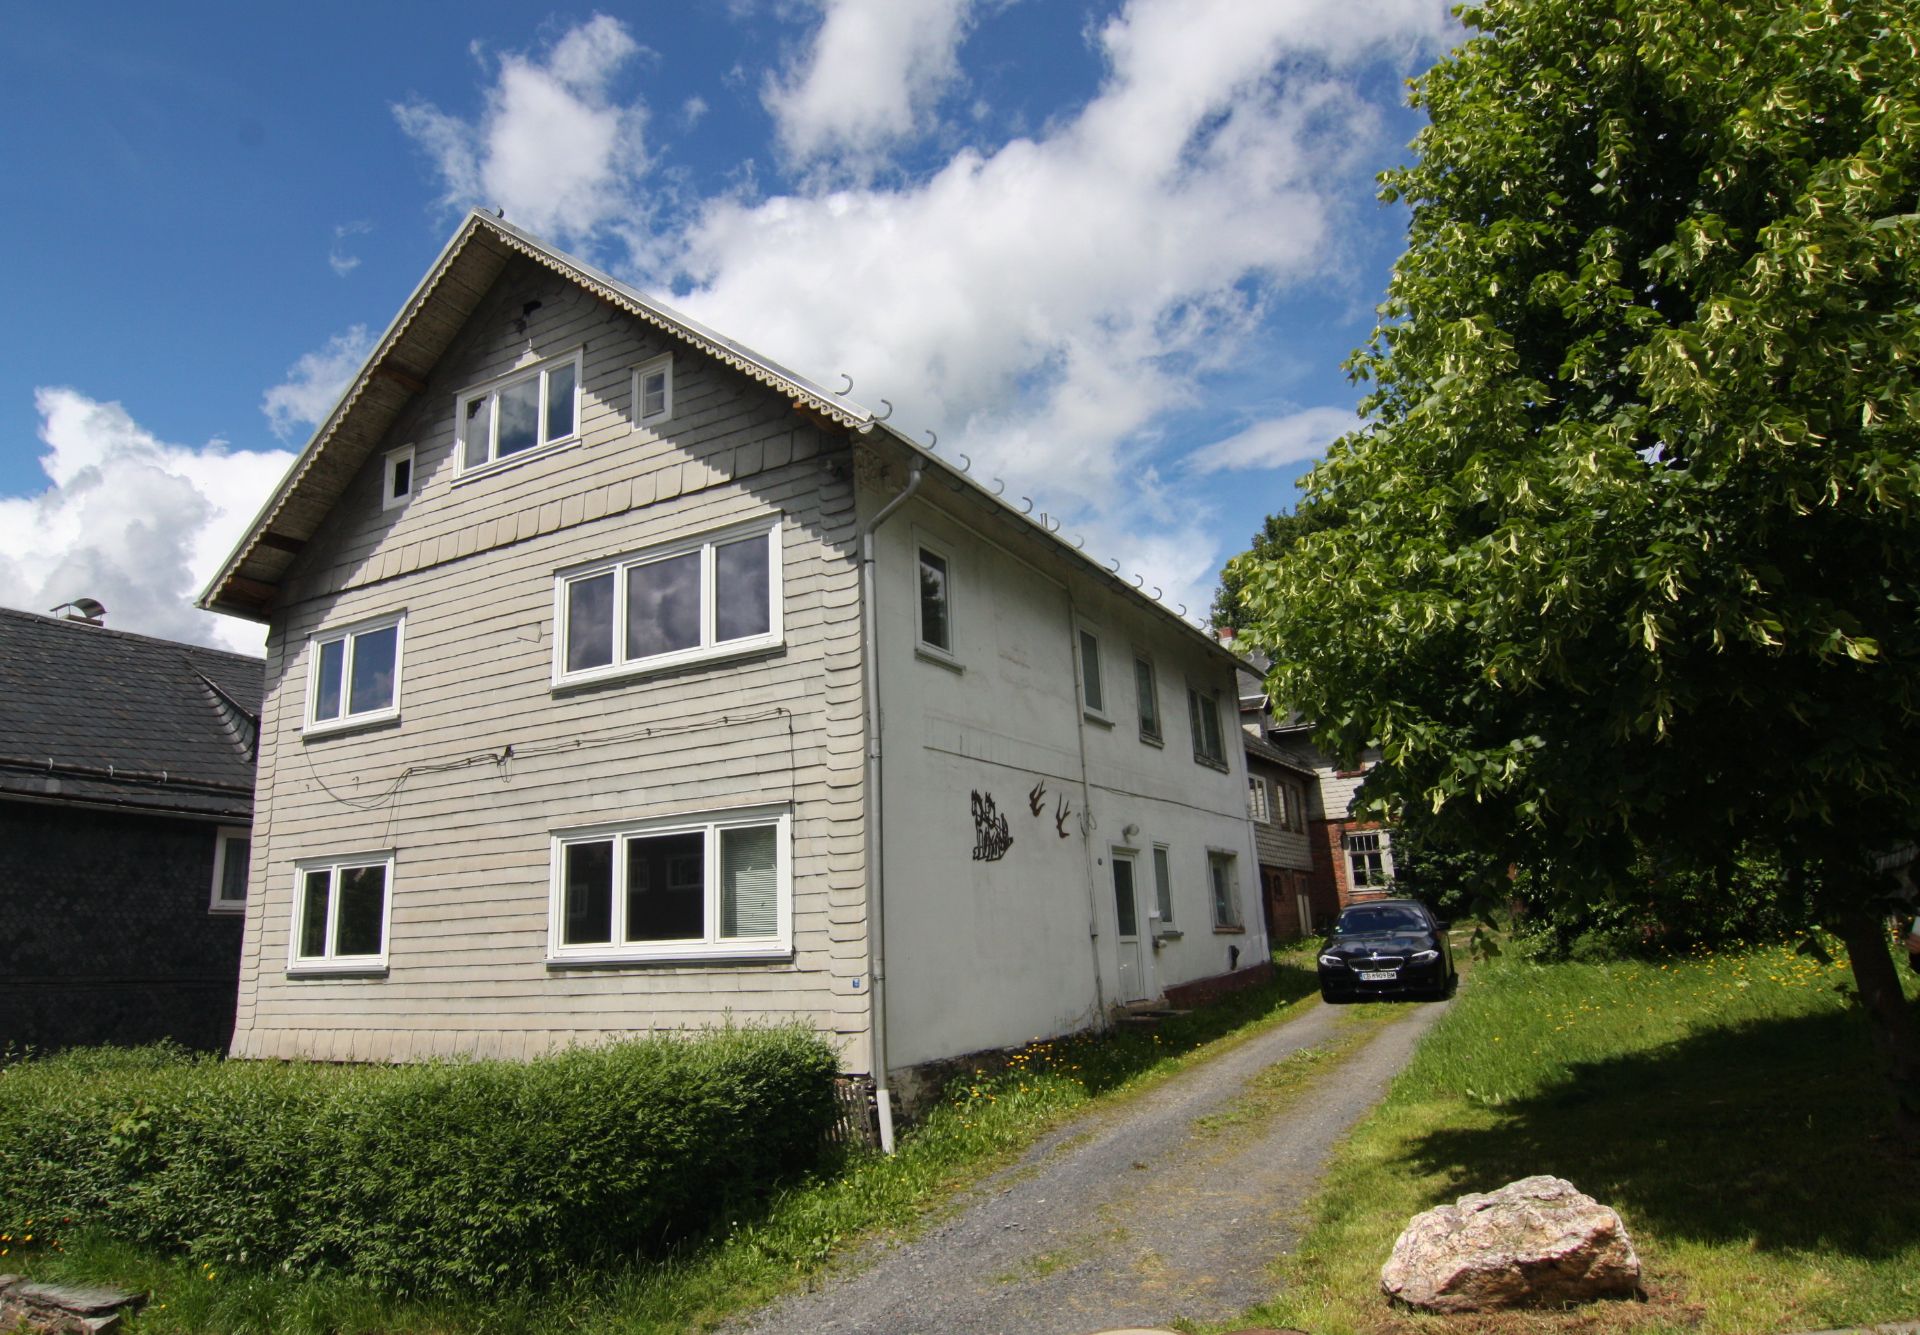 Meuselbach-Schwarzm.hle, Germany - HUGE 50 ROOM HOUSE(S) PUB AND WORKSHOPS 1/2 ACRE - Image 68 of 113